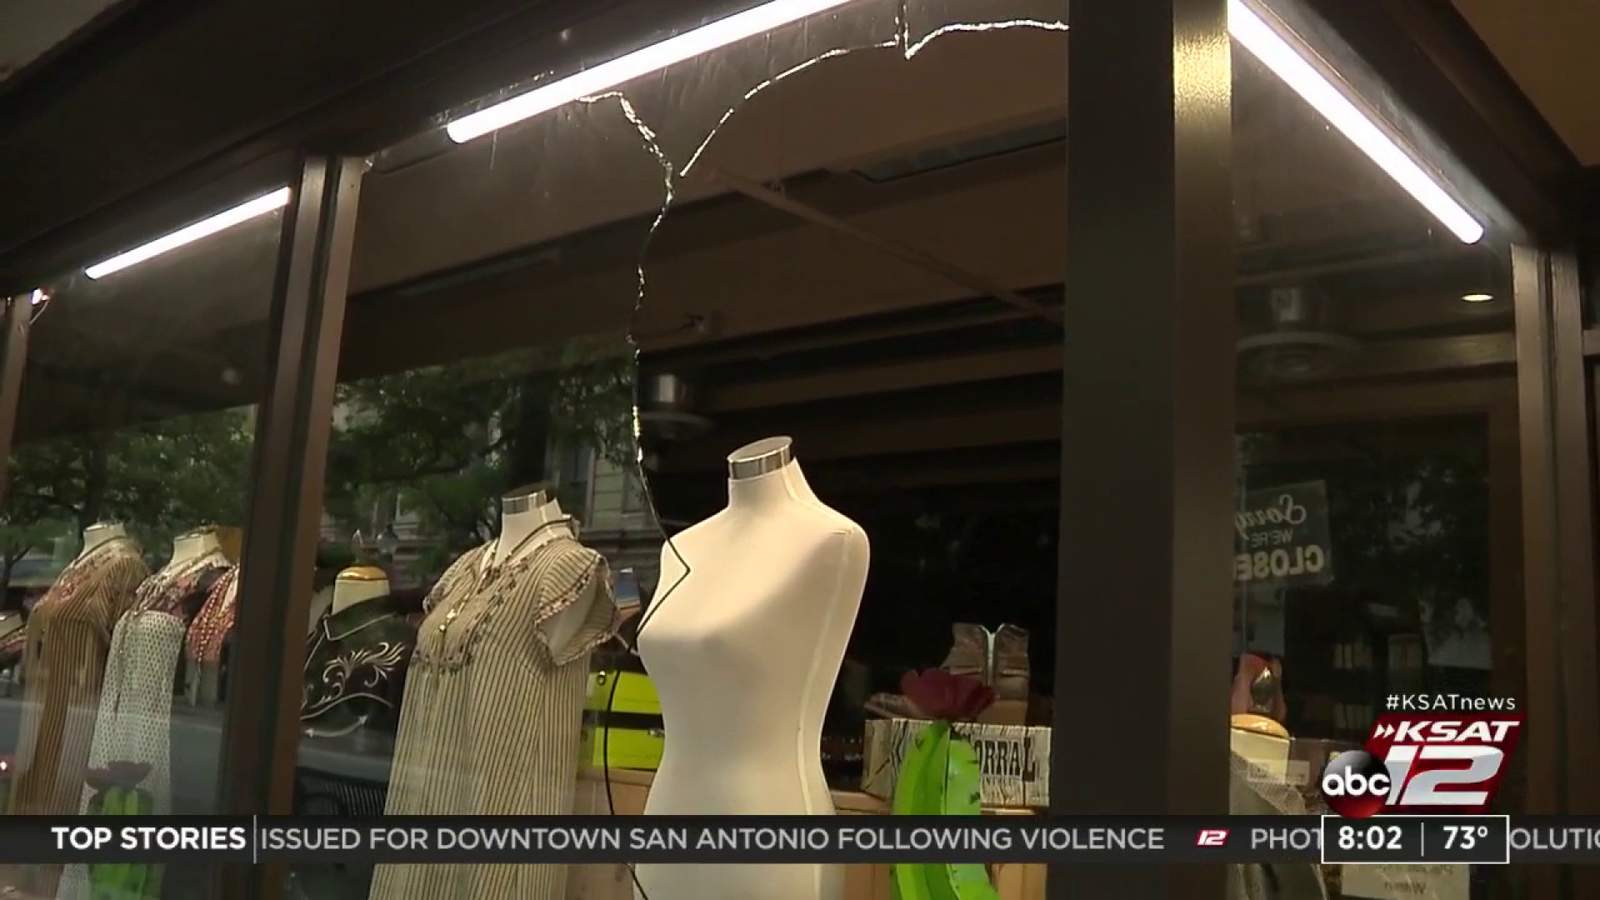 Cleanup begins after downtown San Antonio stores damaged and vandalized